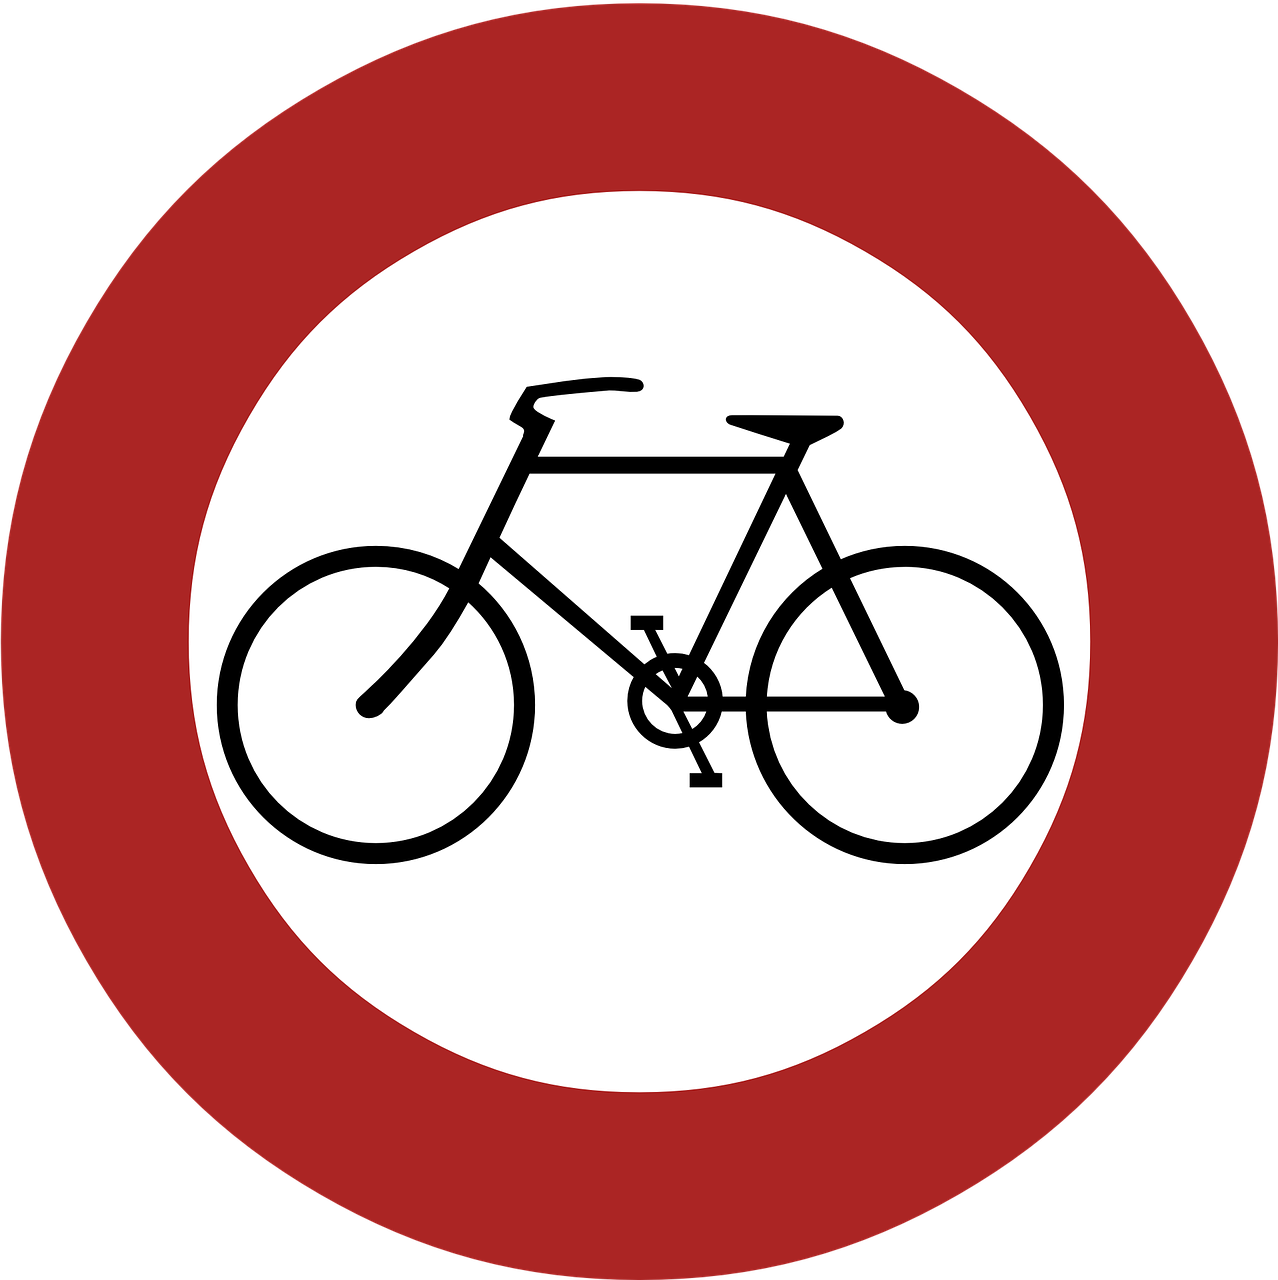 ban cyclists sign free photo